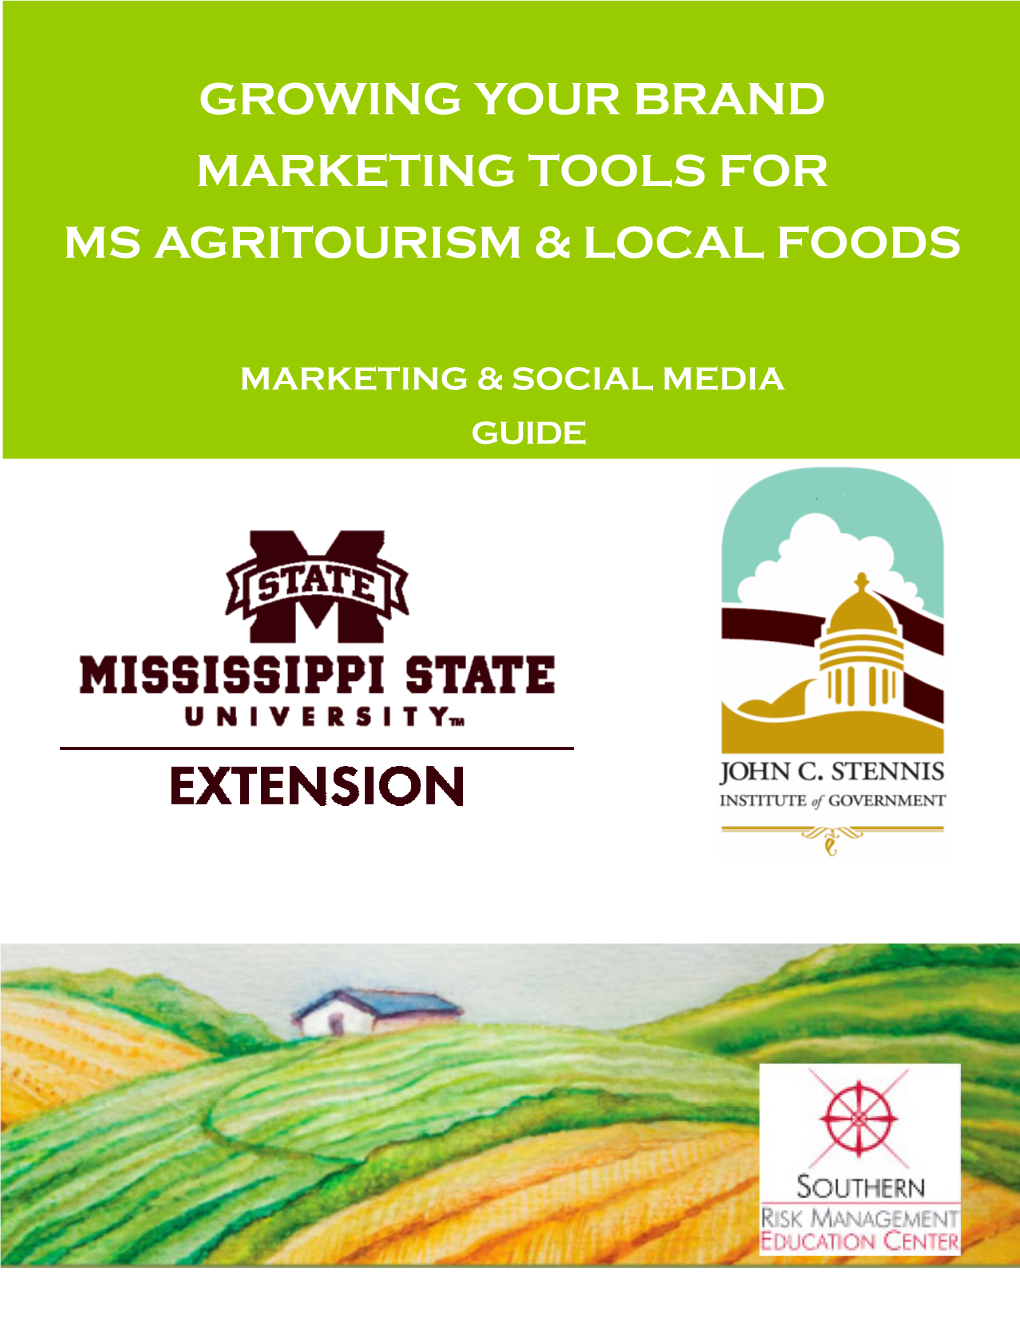 Growing Your Brand Marketing Tools for Mississippi Agritourism & Local